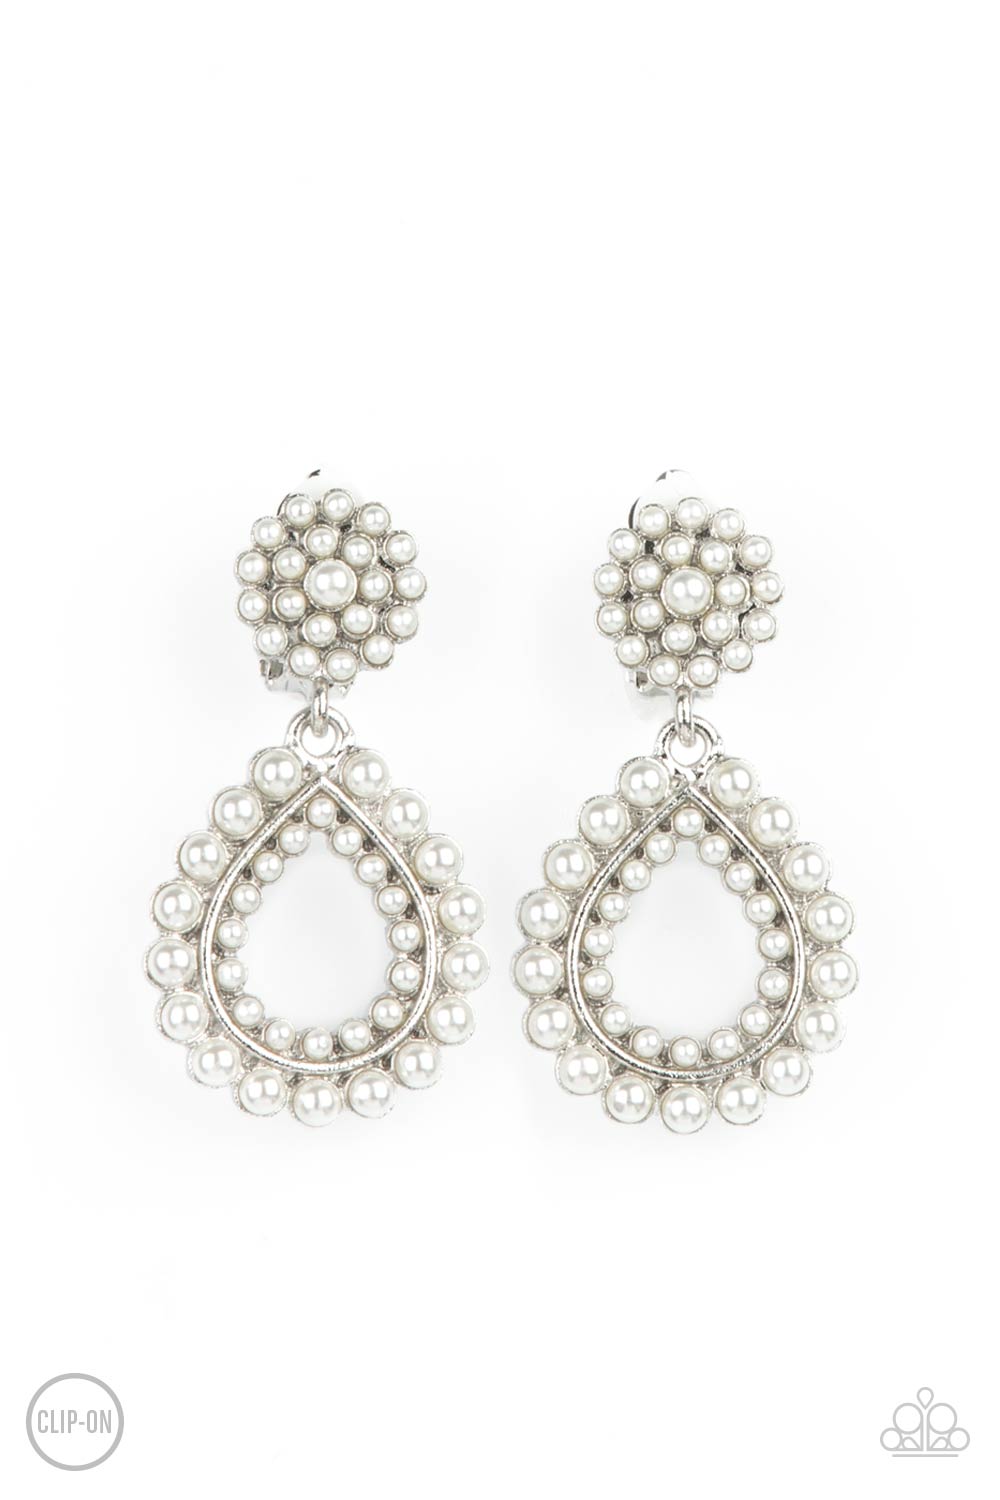 Discerning Droplets - white - Paparazzil CLIP ON earrings